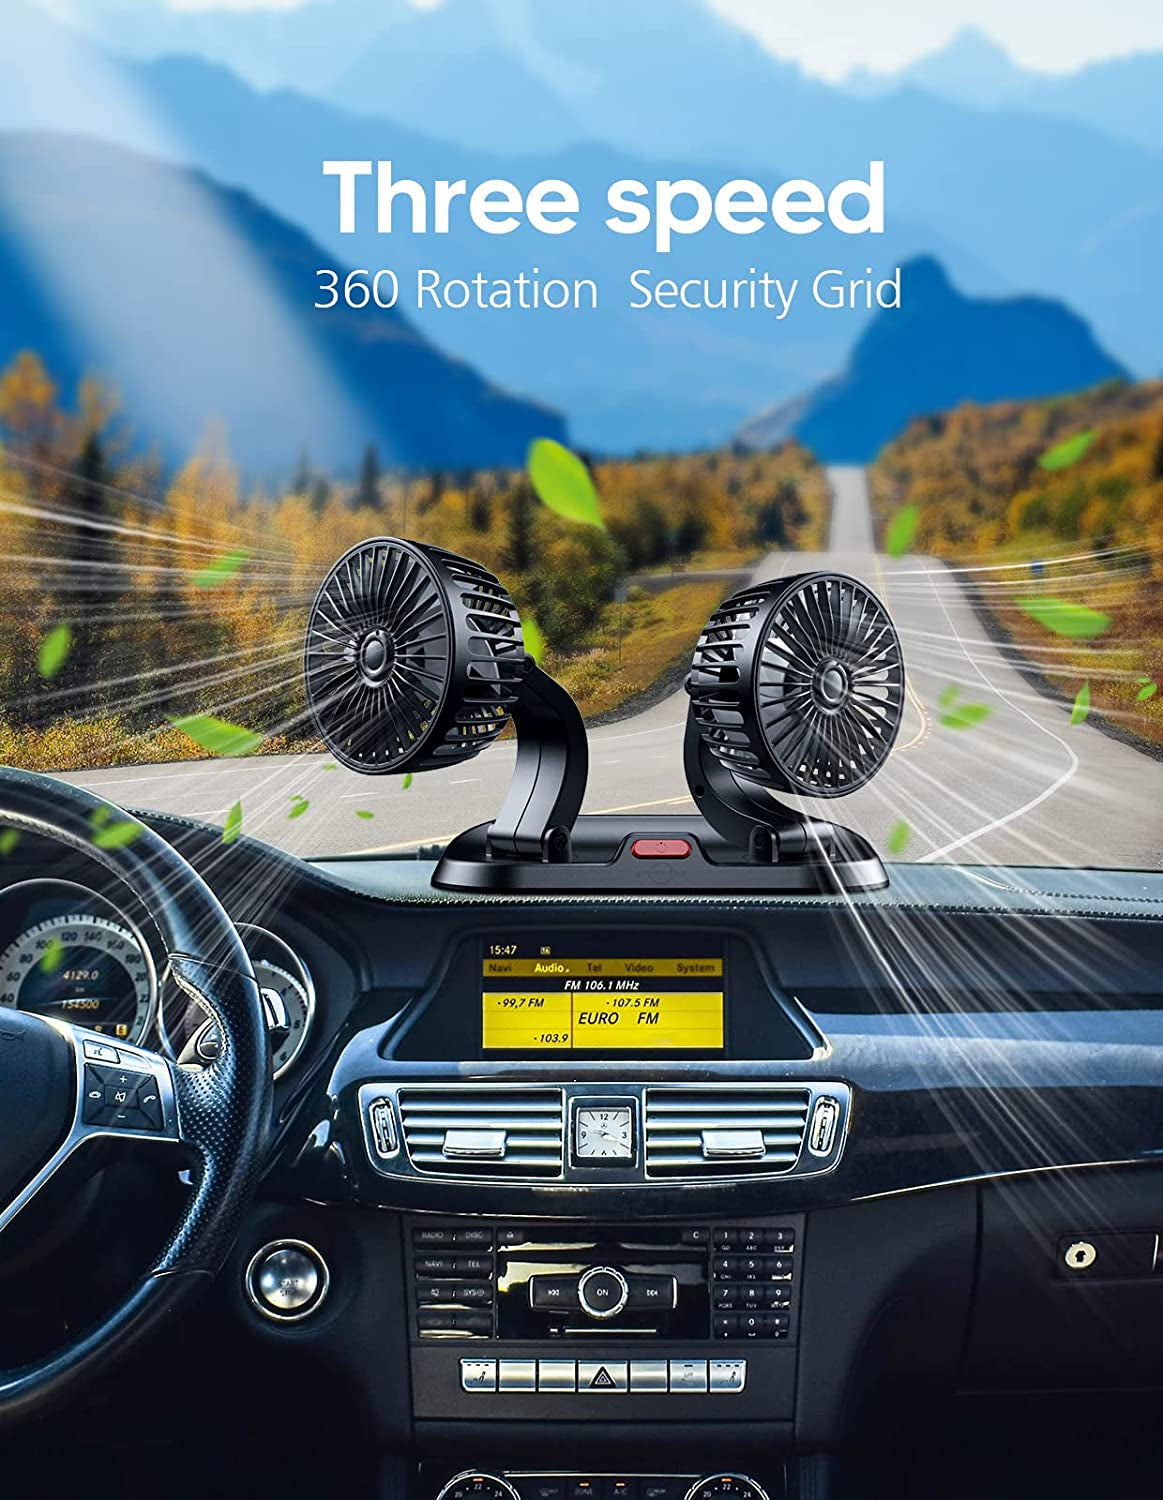 USB Portable Car Fan with Dual Head, 3 Speeds, 360 Degree Rotation, Strong Wind, for Dashboard, SUV, RV, Truck, Boat, Sedan, Home, and Office Use